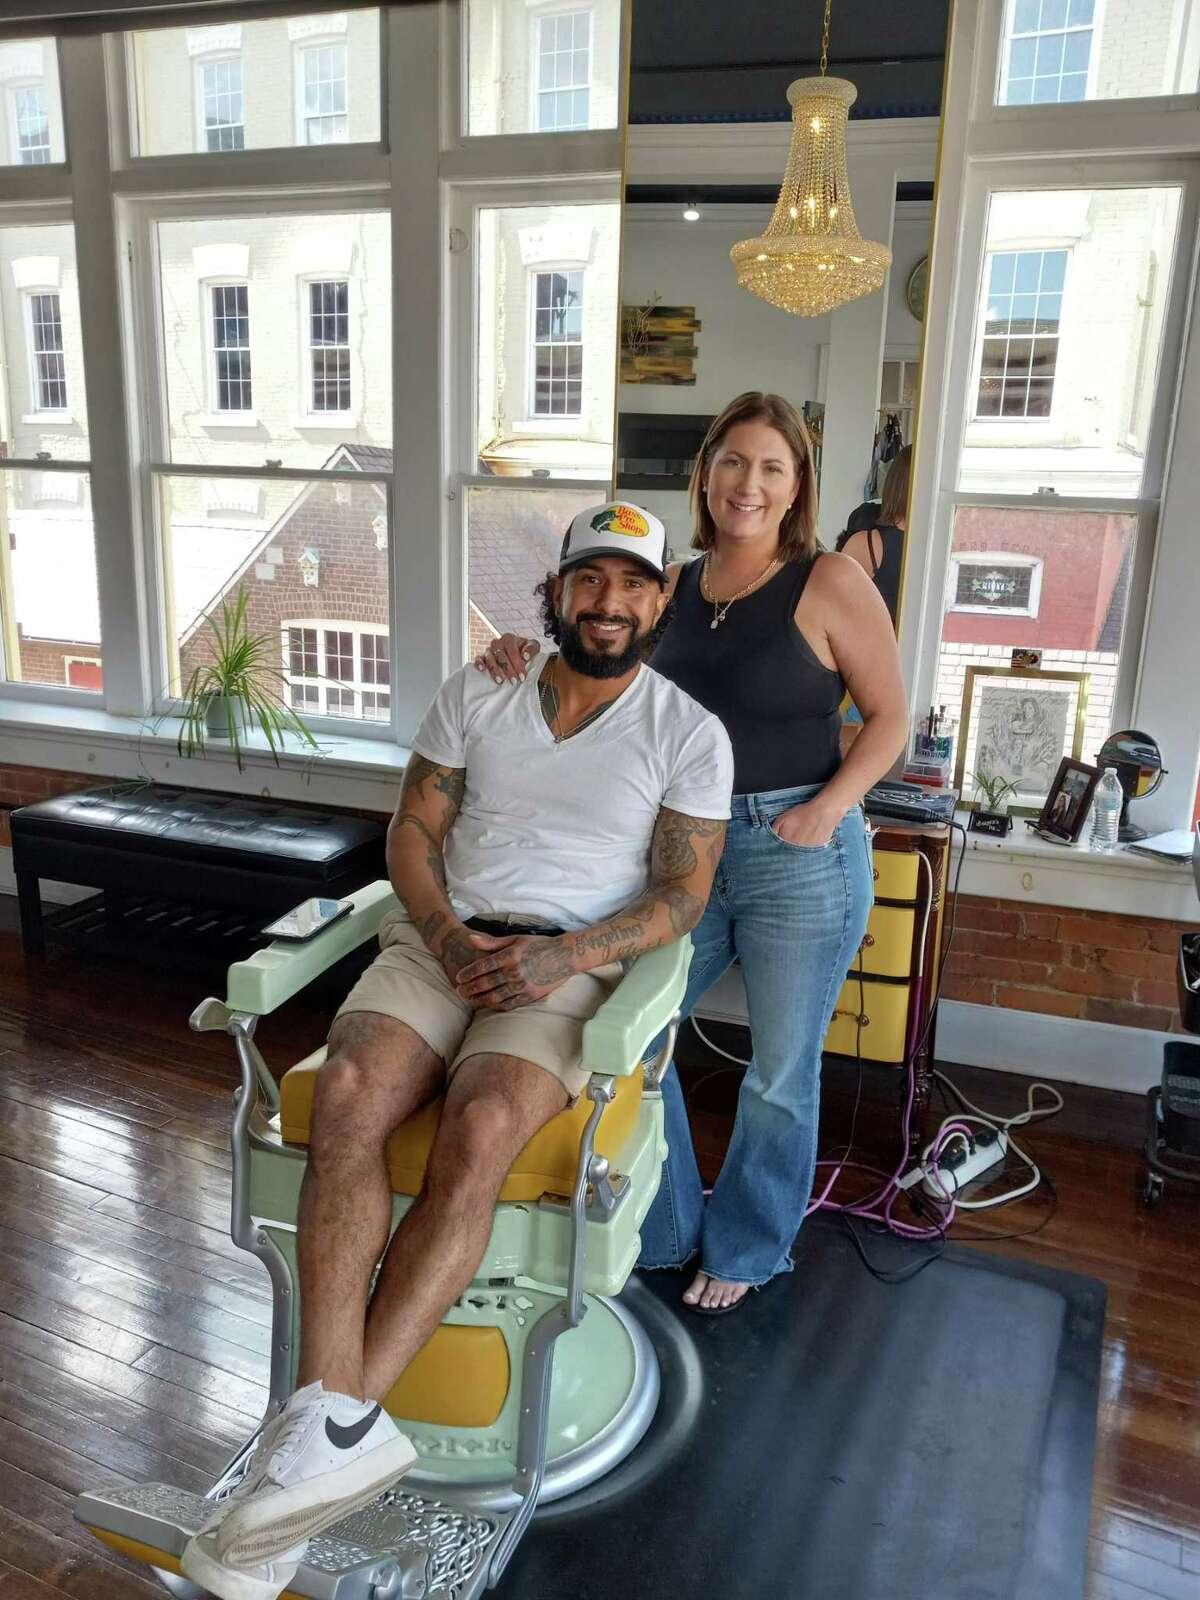 Amy Pozzo and Braulio Abreu recently opened Barber’s Ink, a new barber shop, in a spacious studio at 79 Main St. The building is owned by the Torrington Downtown Partners.